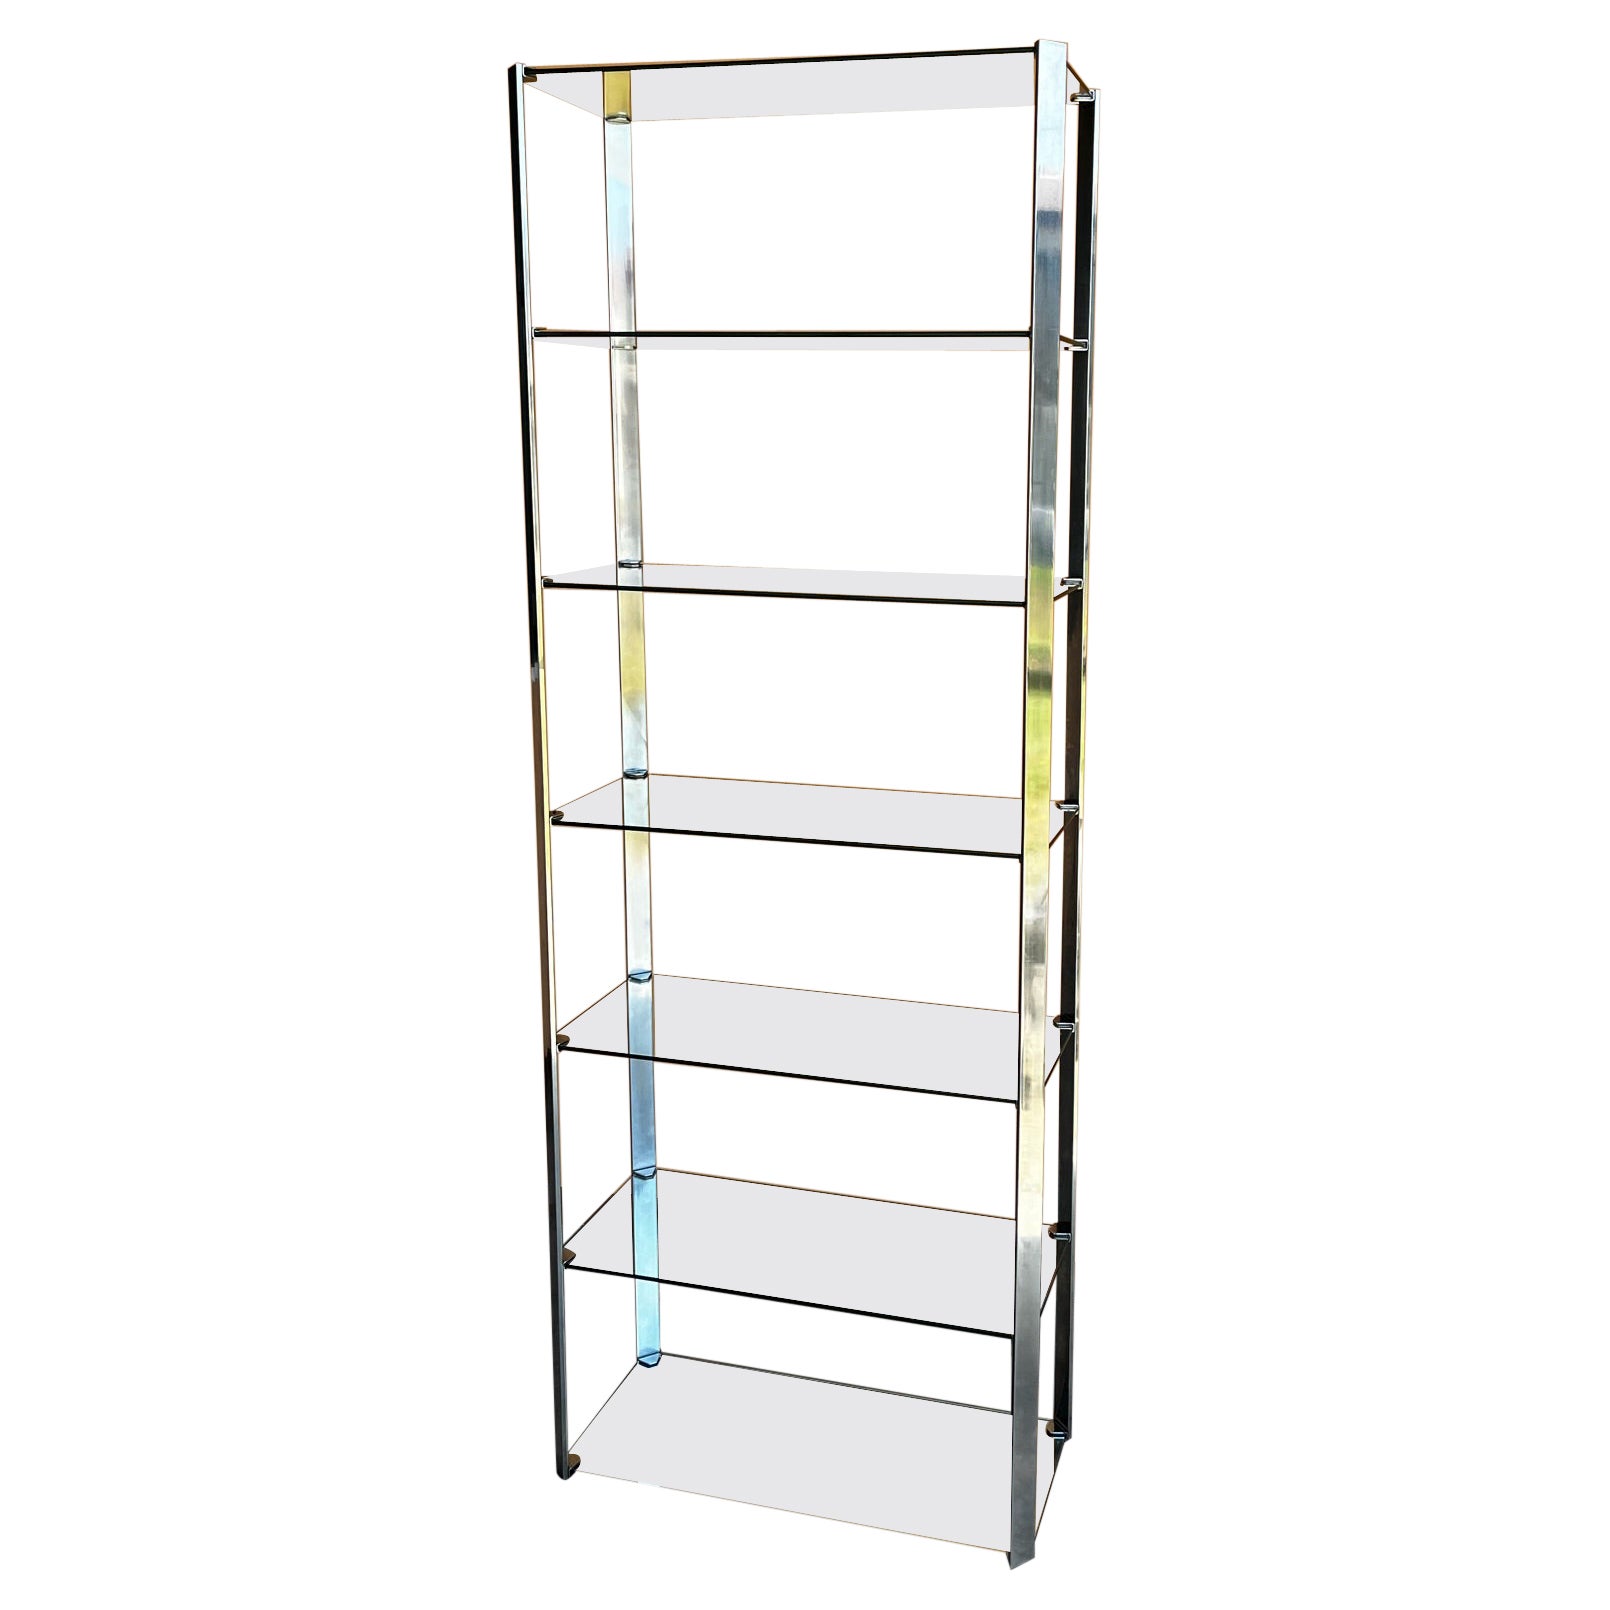 1970s Willy Rizzo Steel Glass and Mirror Shelves Cdue Production Bookcase For Sale